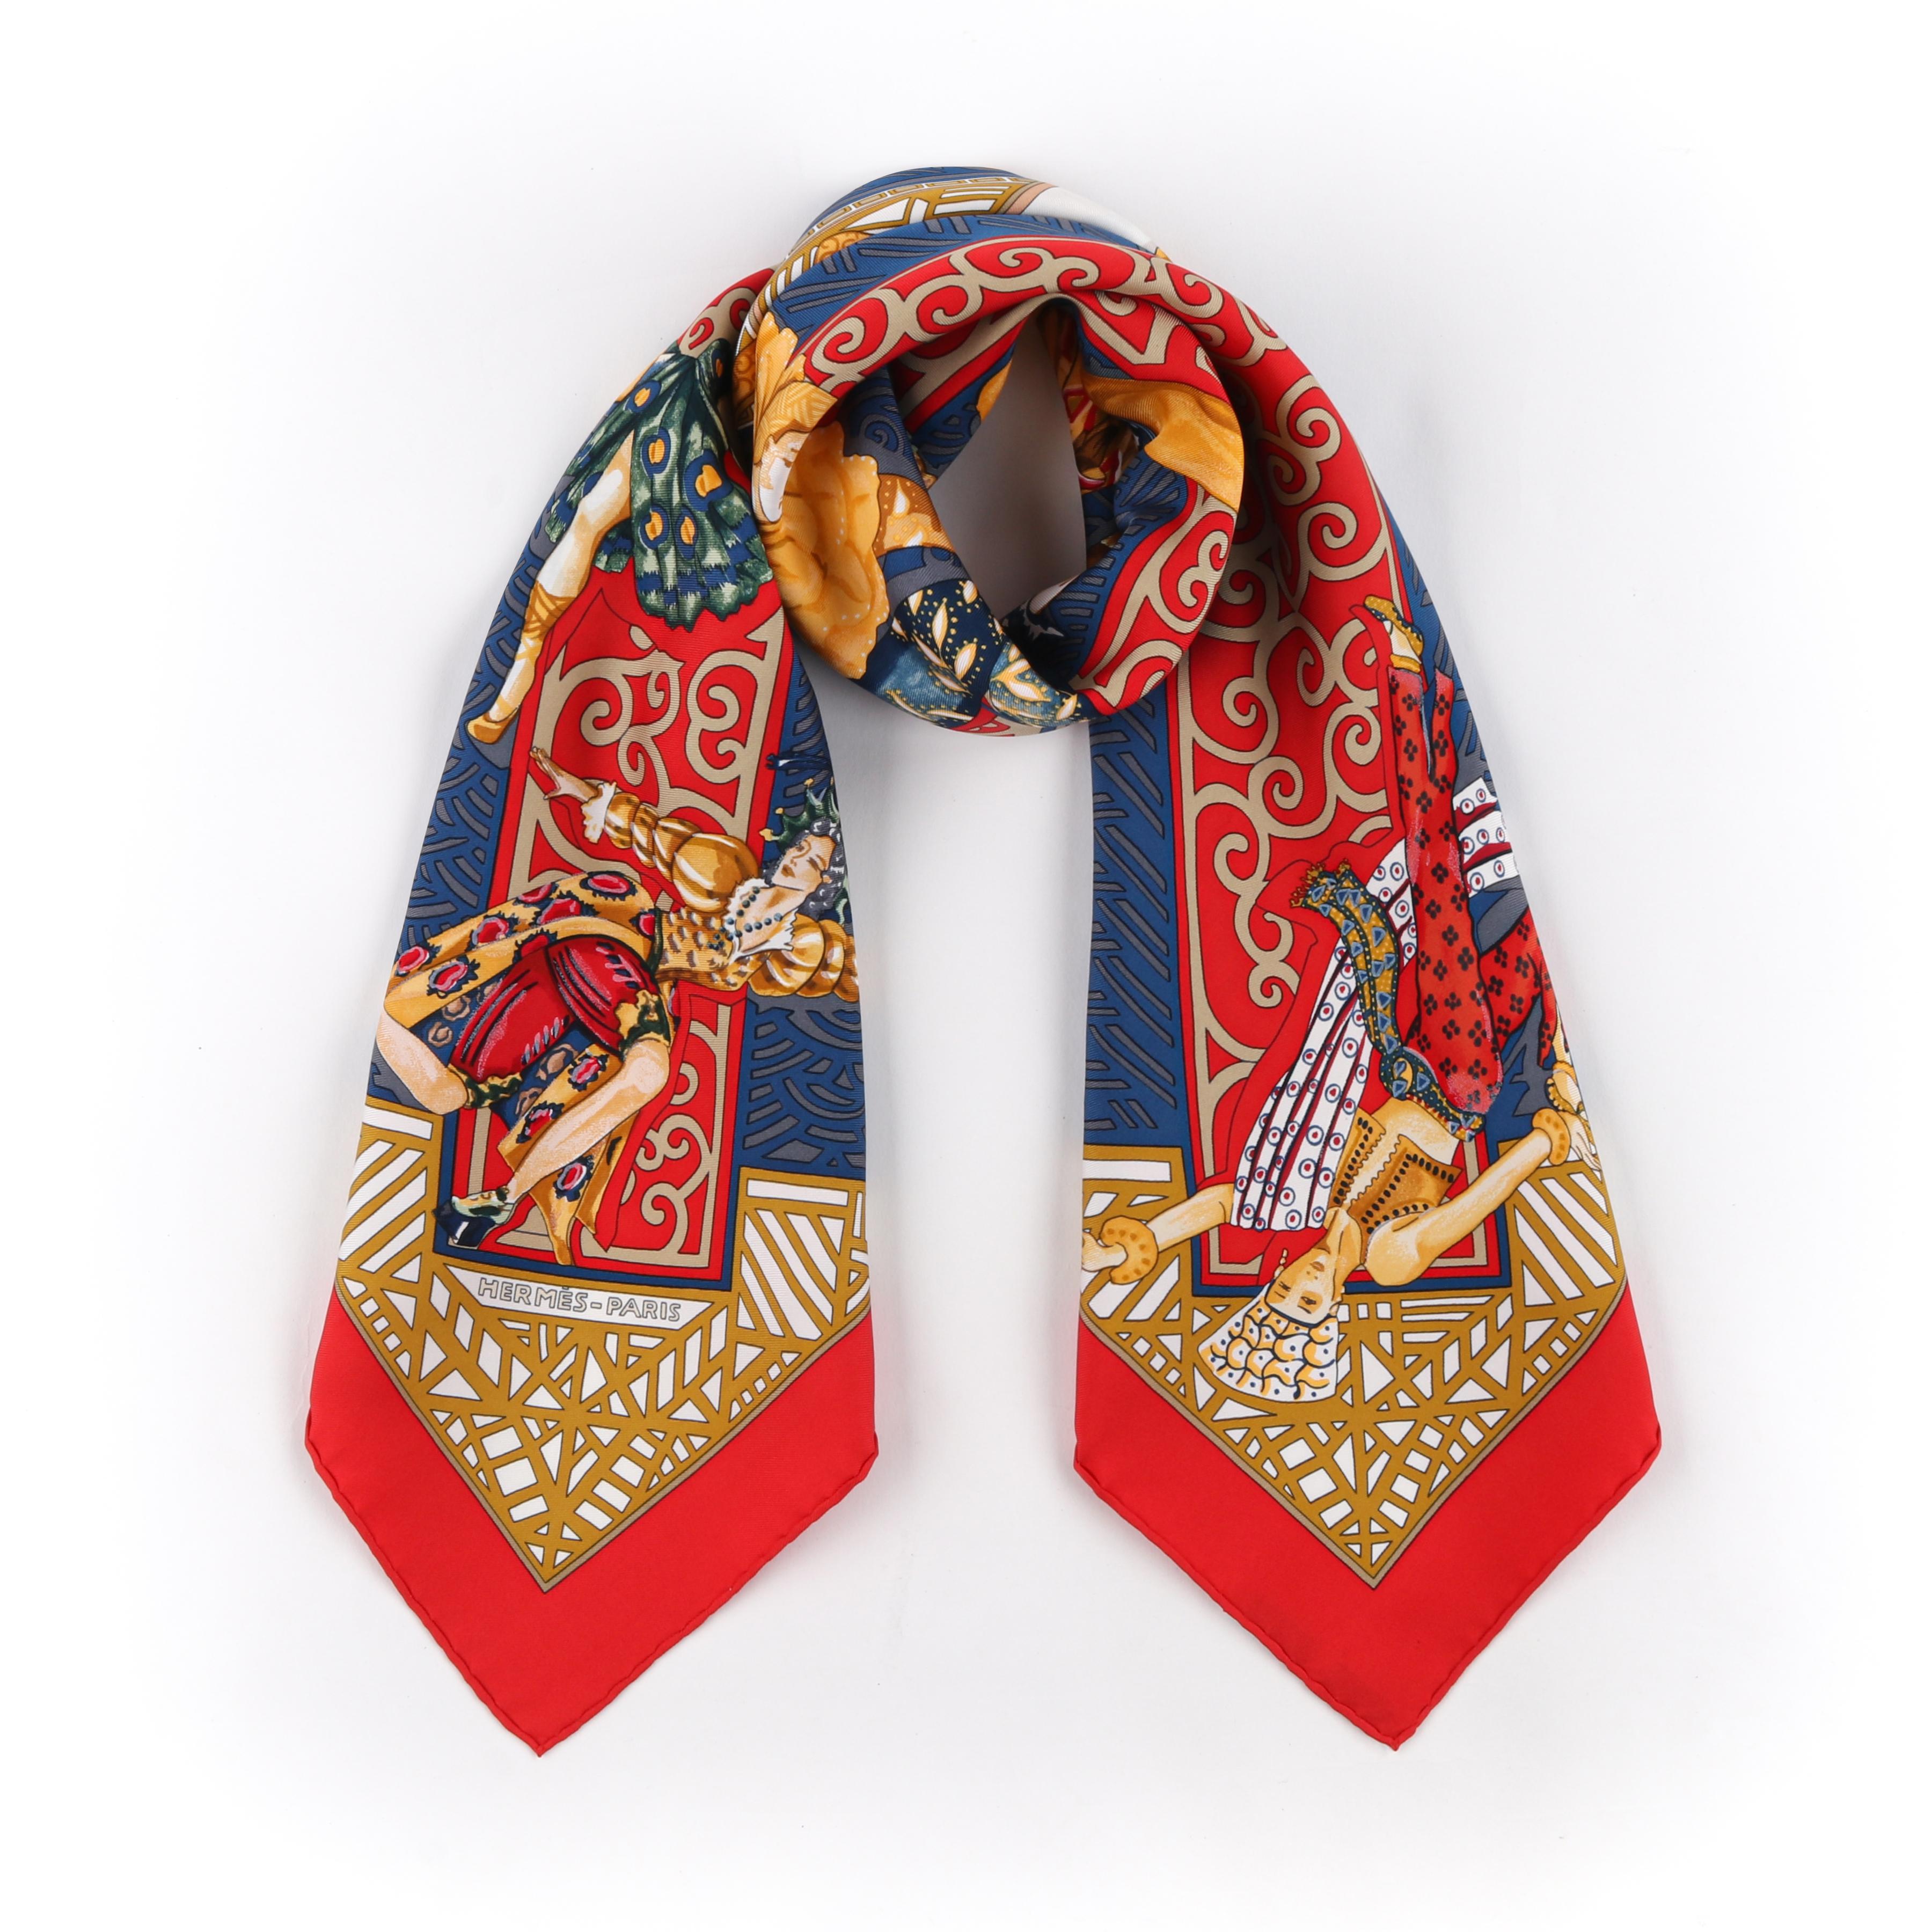 HERMES “Les Ballets Russes” Anne Faivre 1996 Red Blue Dancer Square Silk Scarf
 
Brand / Manufacturer: Hermes
Year: 1996
Manufacturer Style Name: “Les Ballets Russes” 
Style: Square Scarf
Color(s): Shades of white, red, blue, and yellow
Lined: